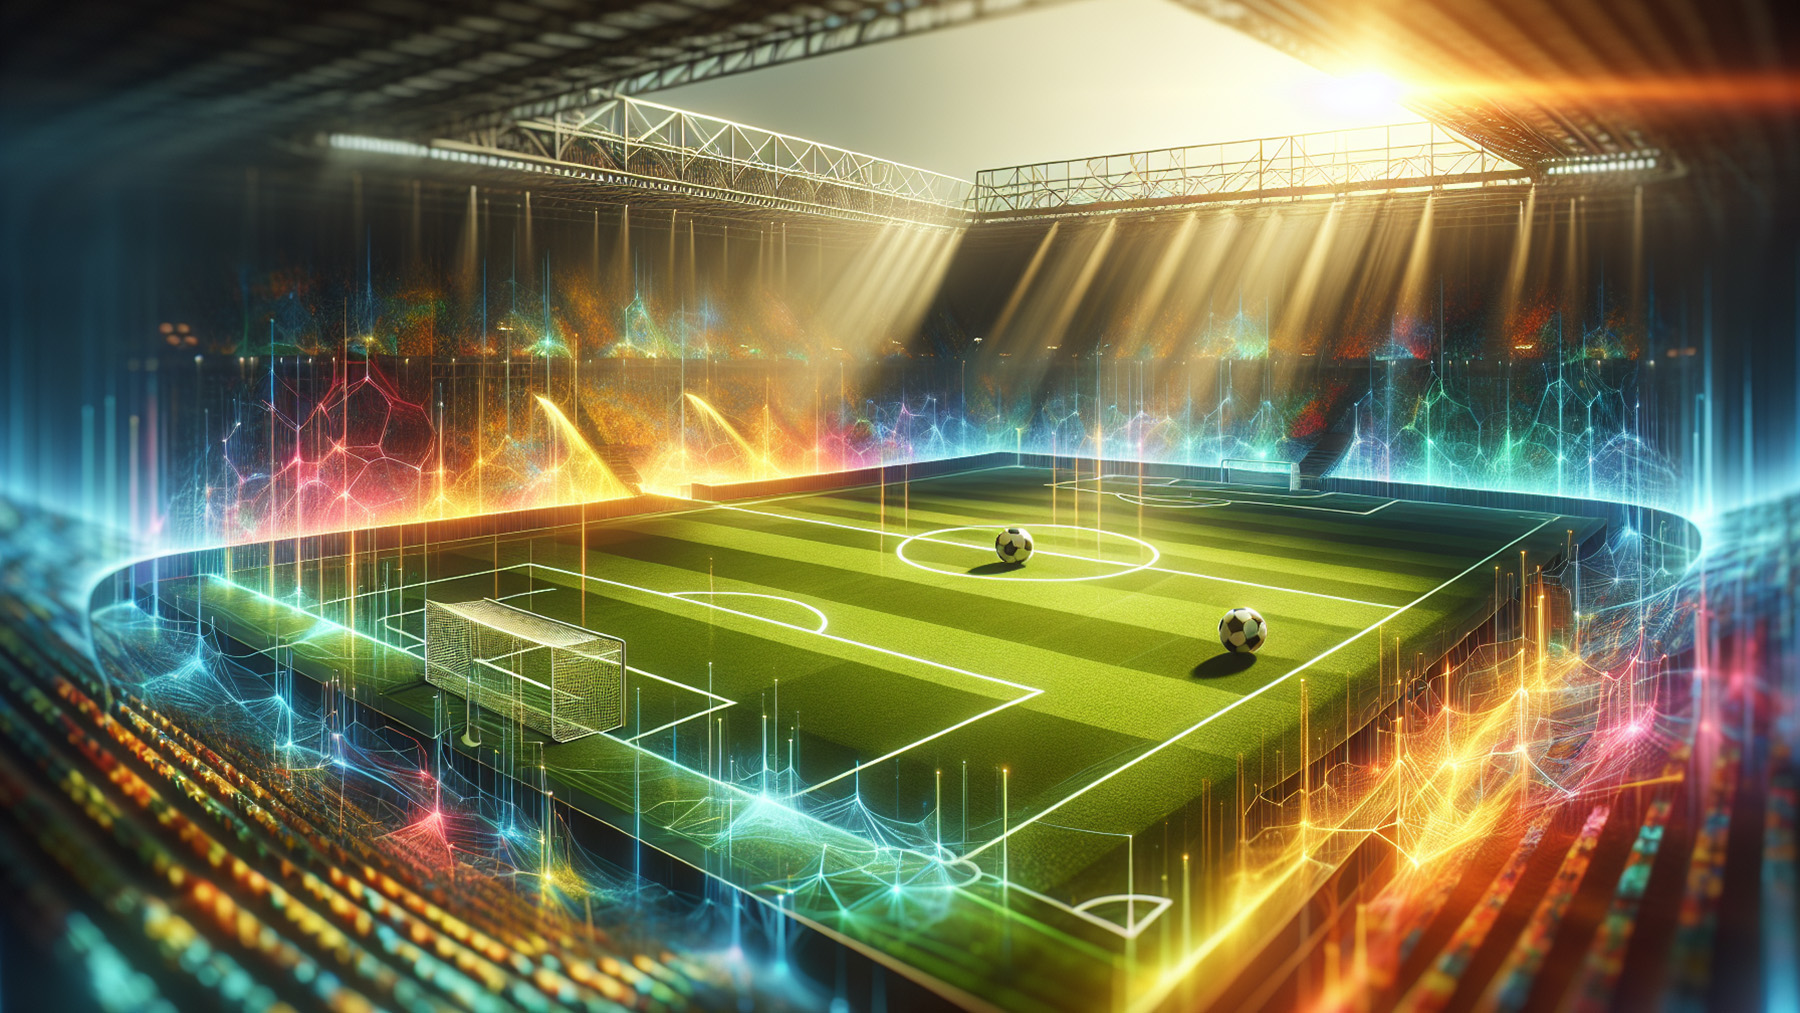 Kicking Around the Digital and Real-World Soccer Pitches